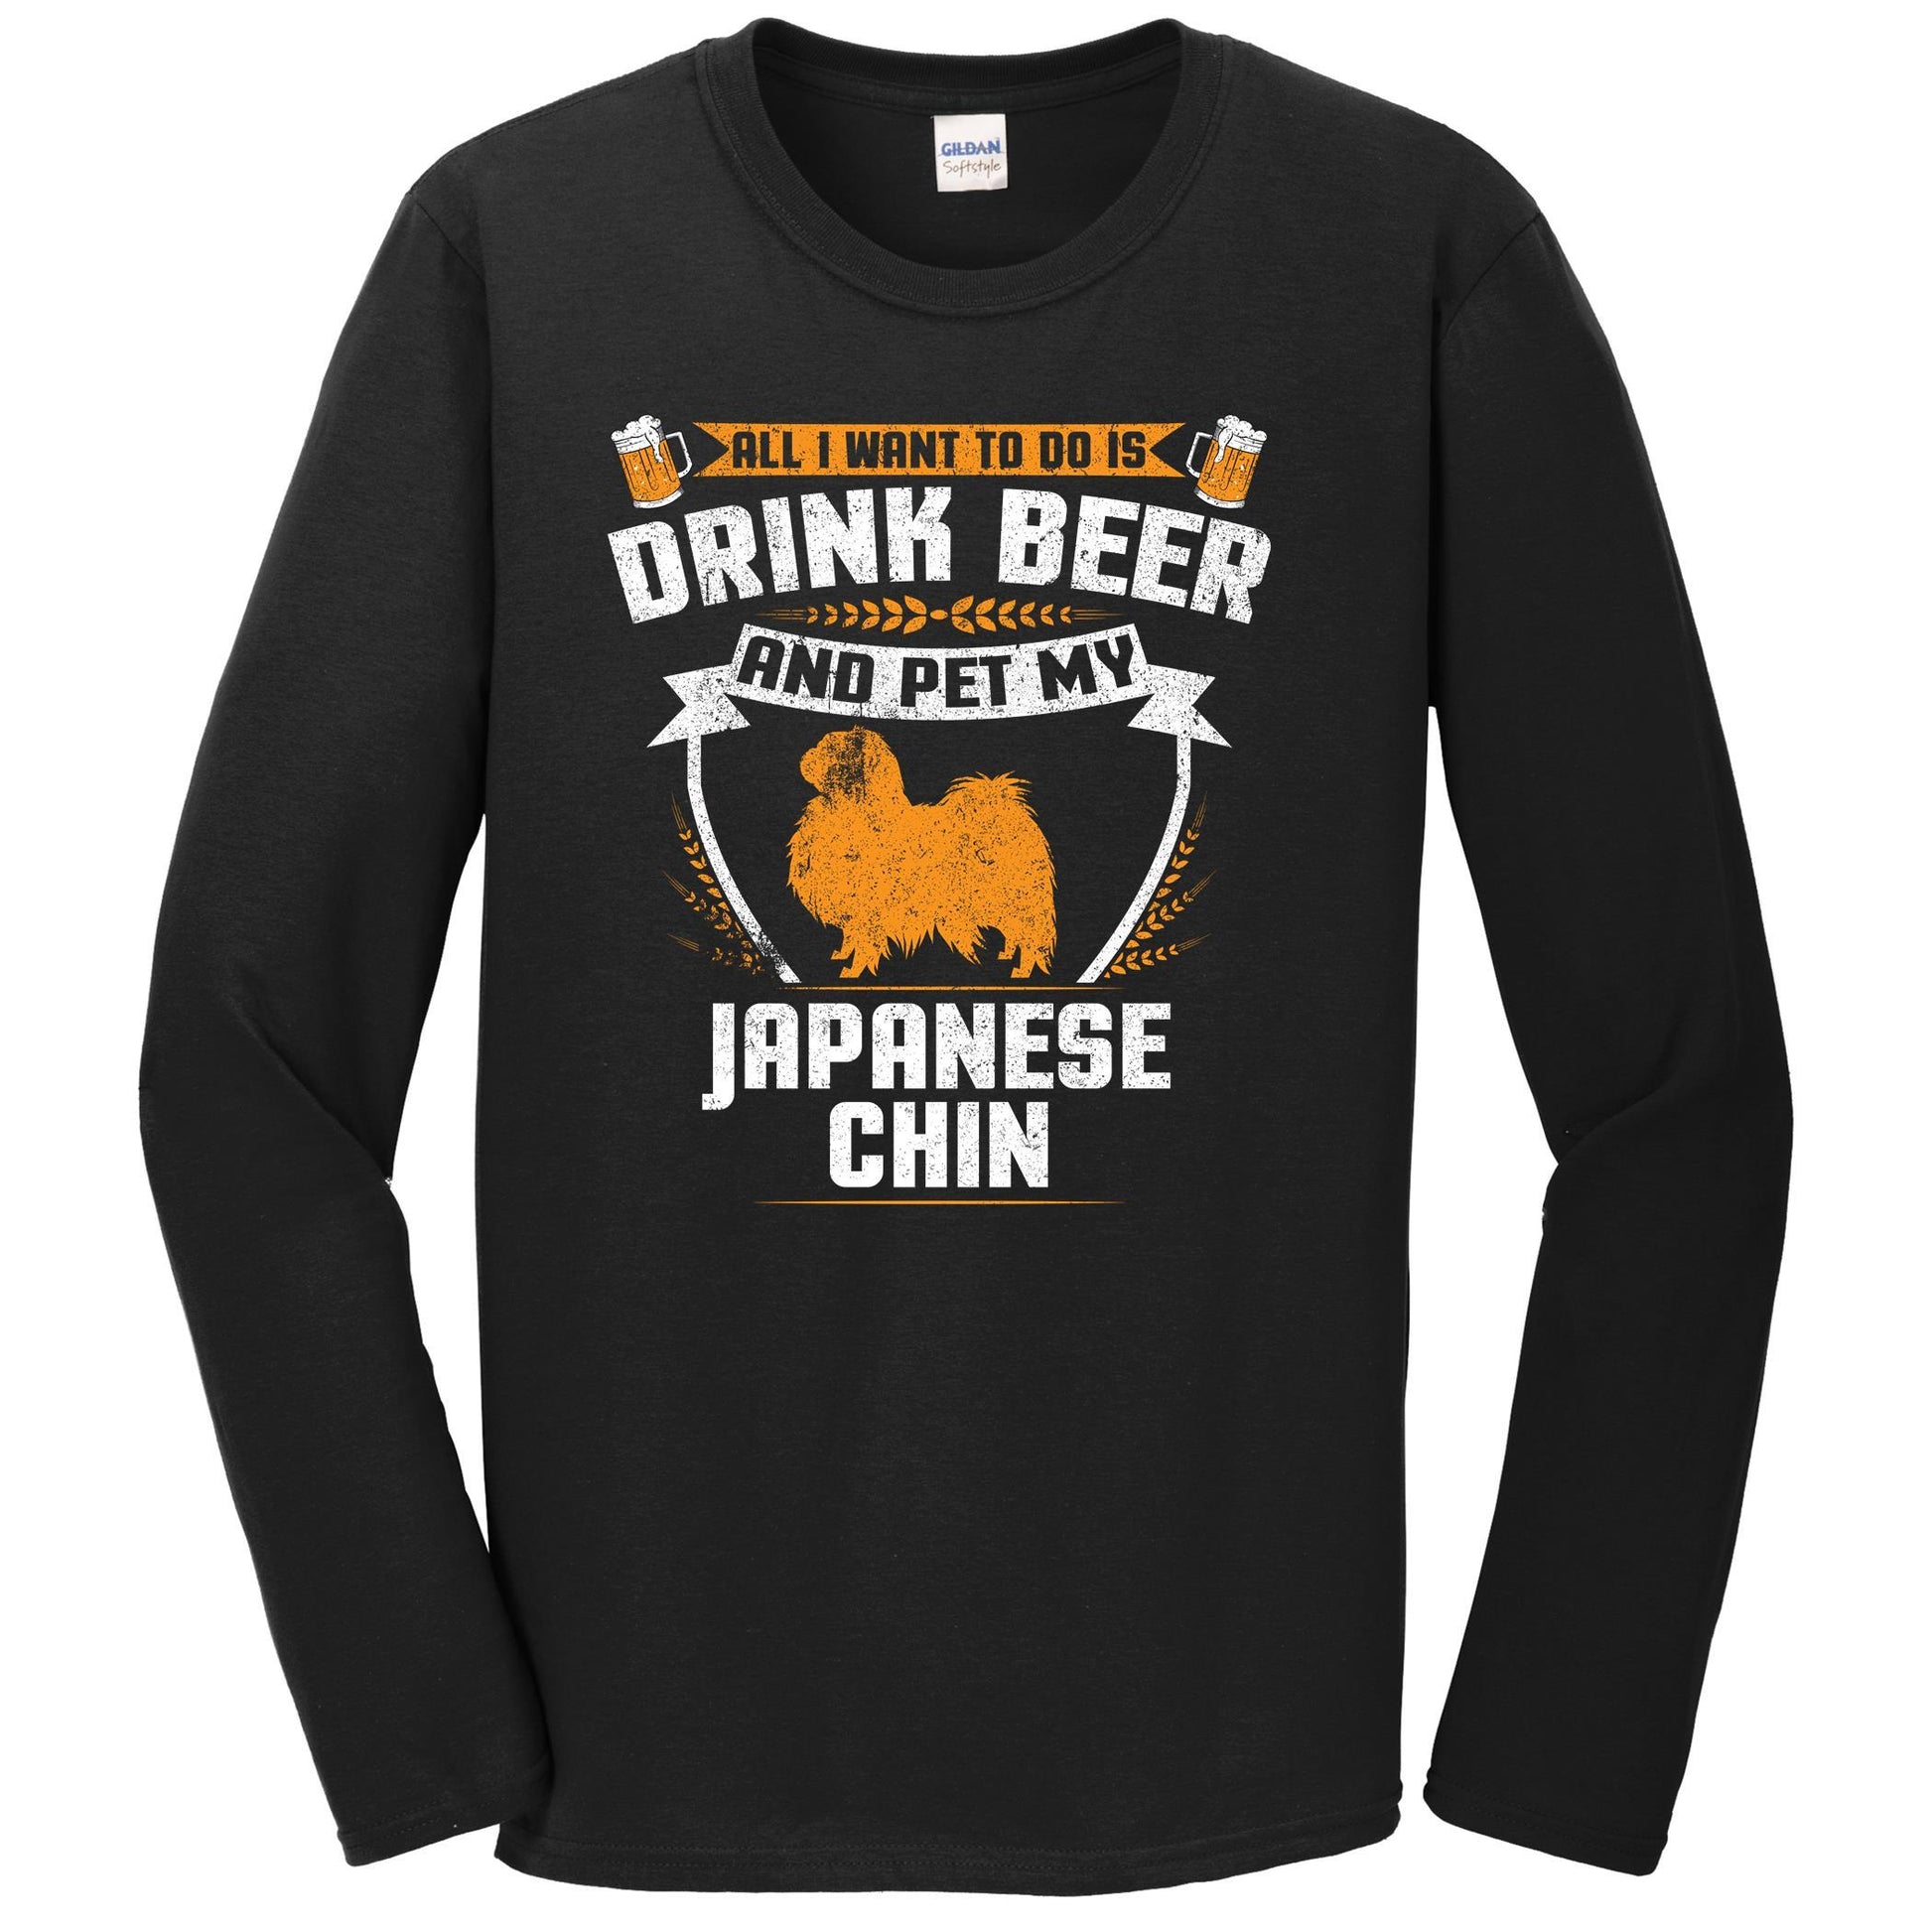 All I Want To Do Is Drink Beer And Pet My Japanese Chin Funny Dog Owner Long Sleeve Shirt